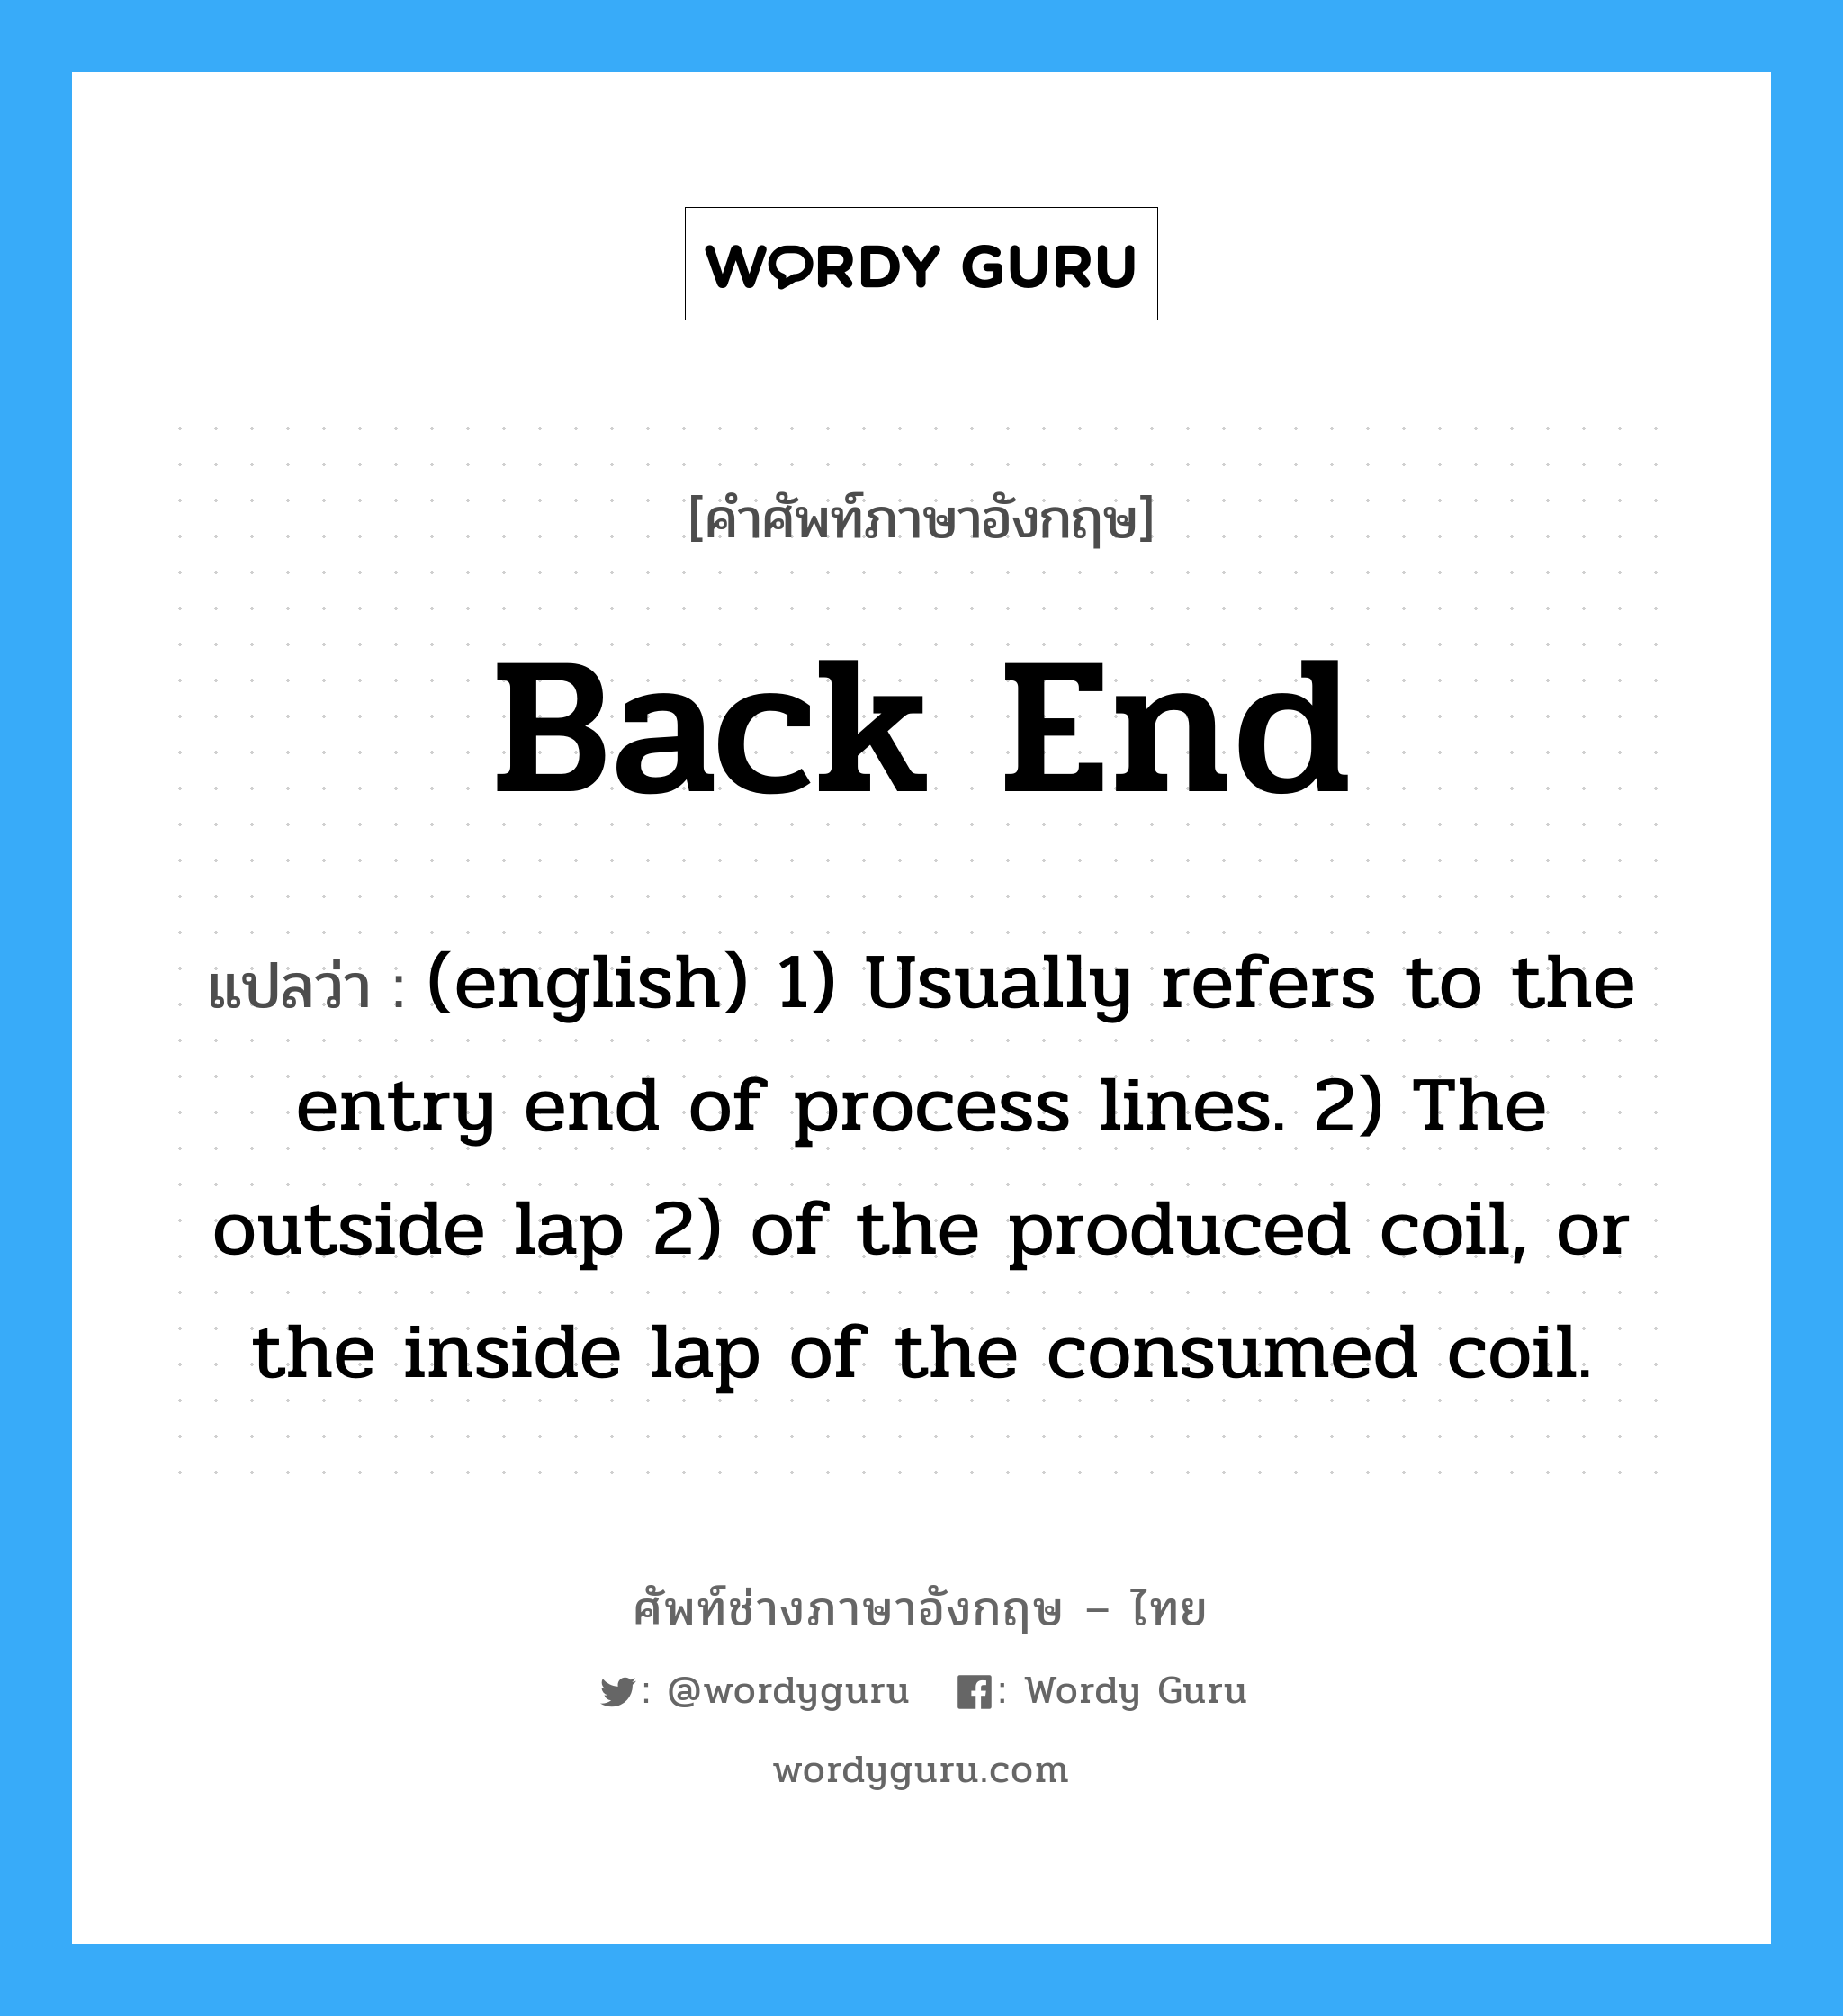 Back End แปลว่า?, คำศัพท์ช่างภาษาอังกฤษ - ไทย Back End คำศัพท์ภาษาอังกฤษ Back End แปลว่า (english) 1) Usually refers to the entry end of process lines. 2) The outside lap 2) of the produced coil, or the inside lap of the consumed coil.